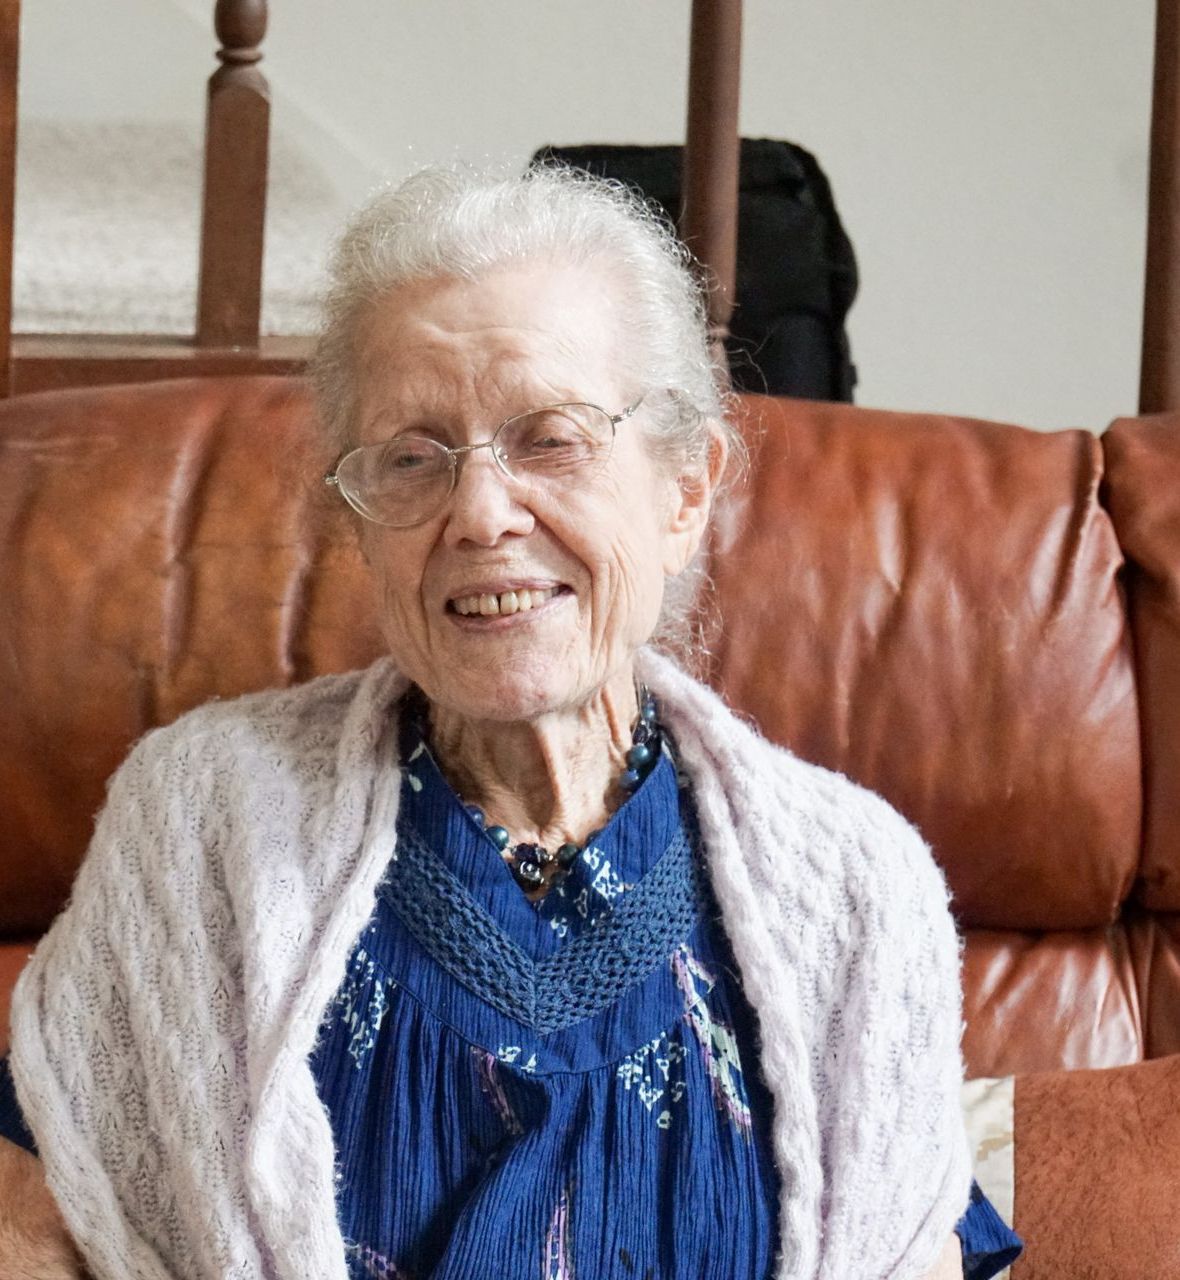 an elderly woman wearing glasses and a blue shirt is sitting on a couch